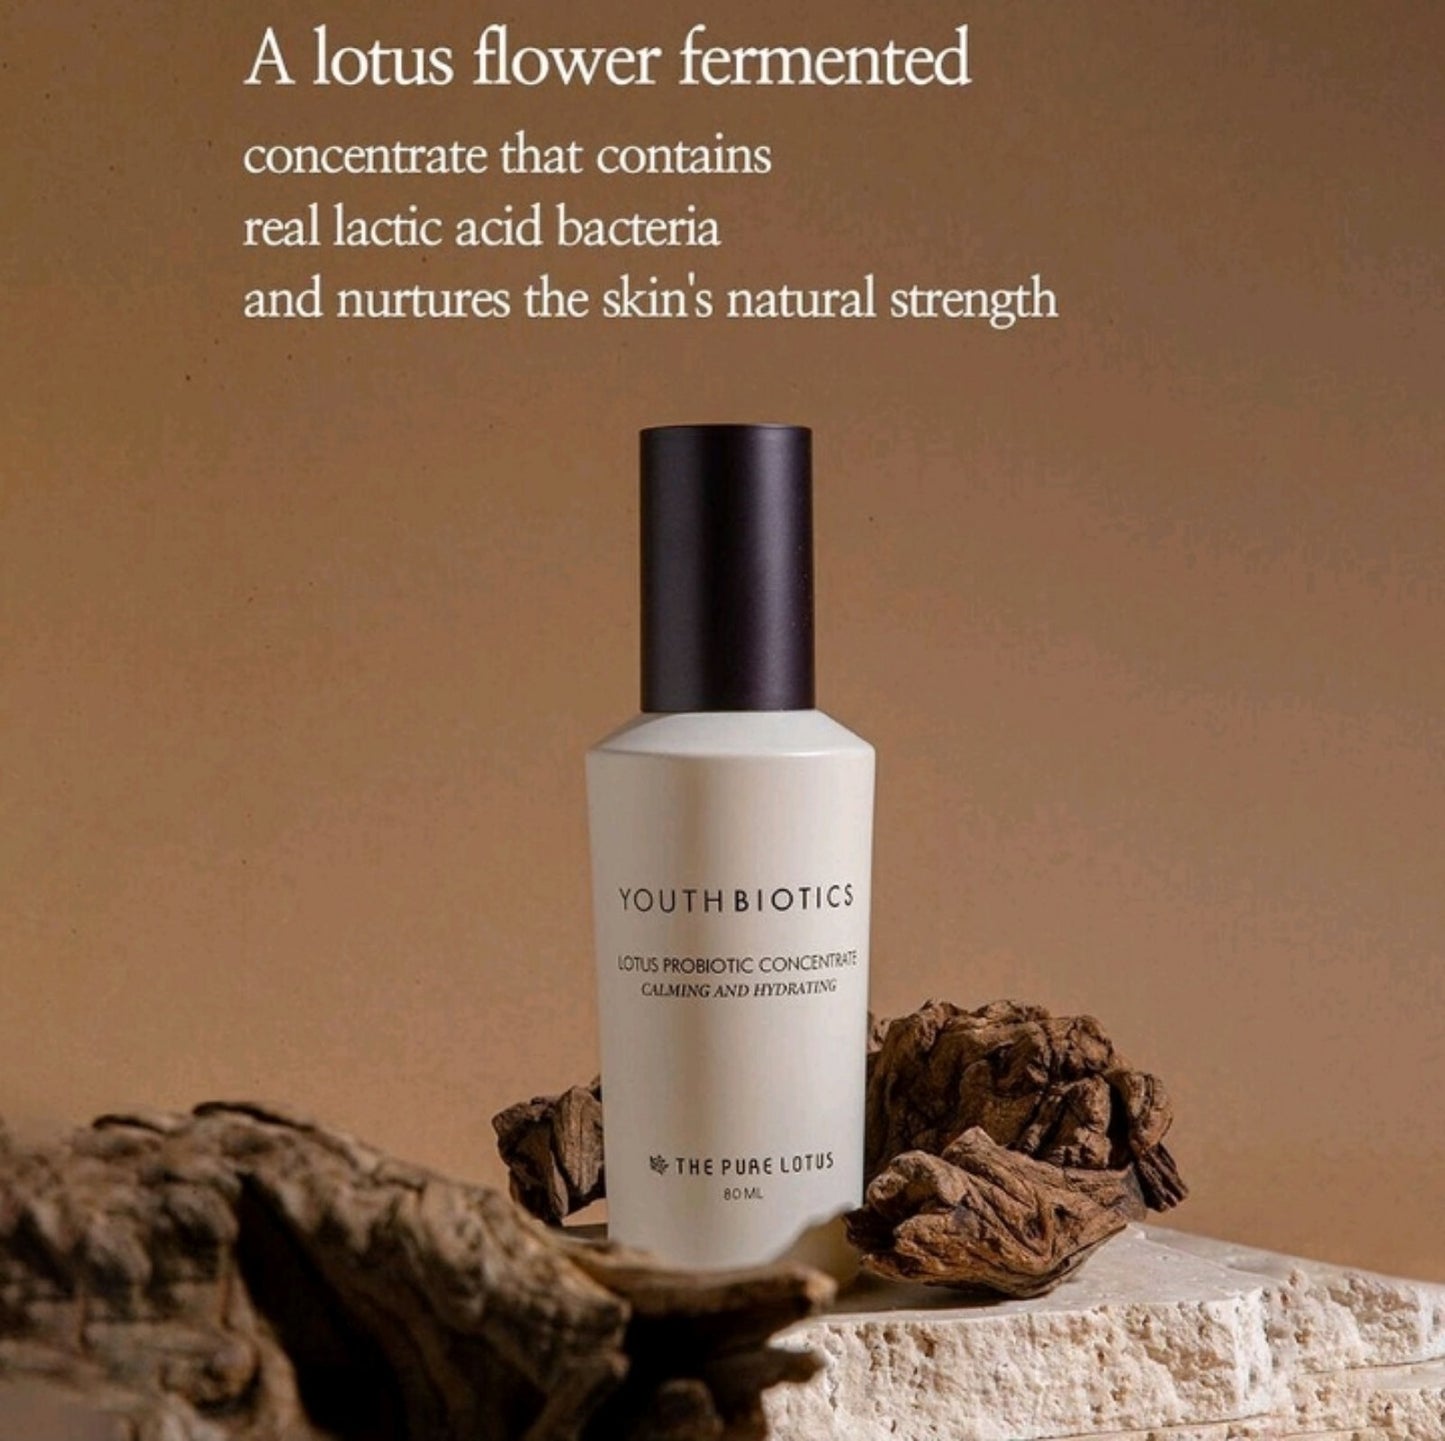 THE PUAE LOTUS CALMING AND HYDRATING